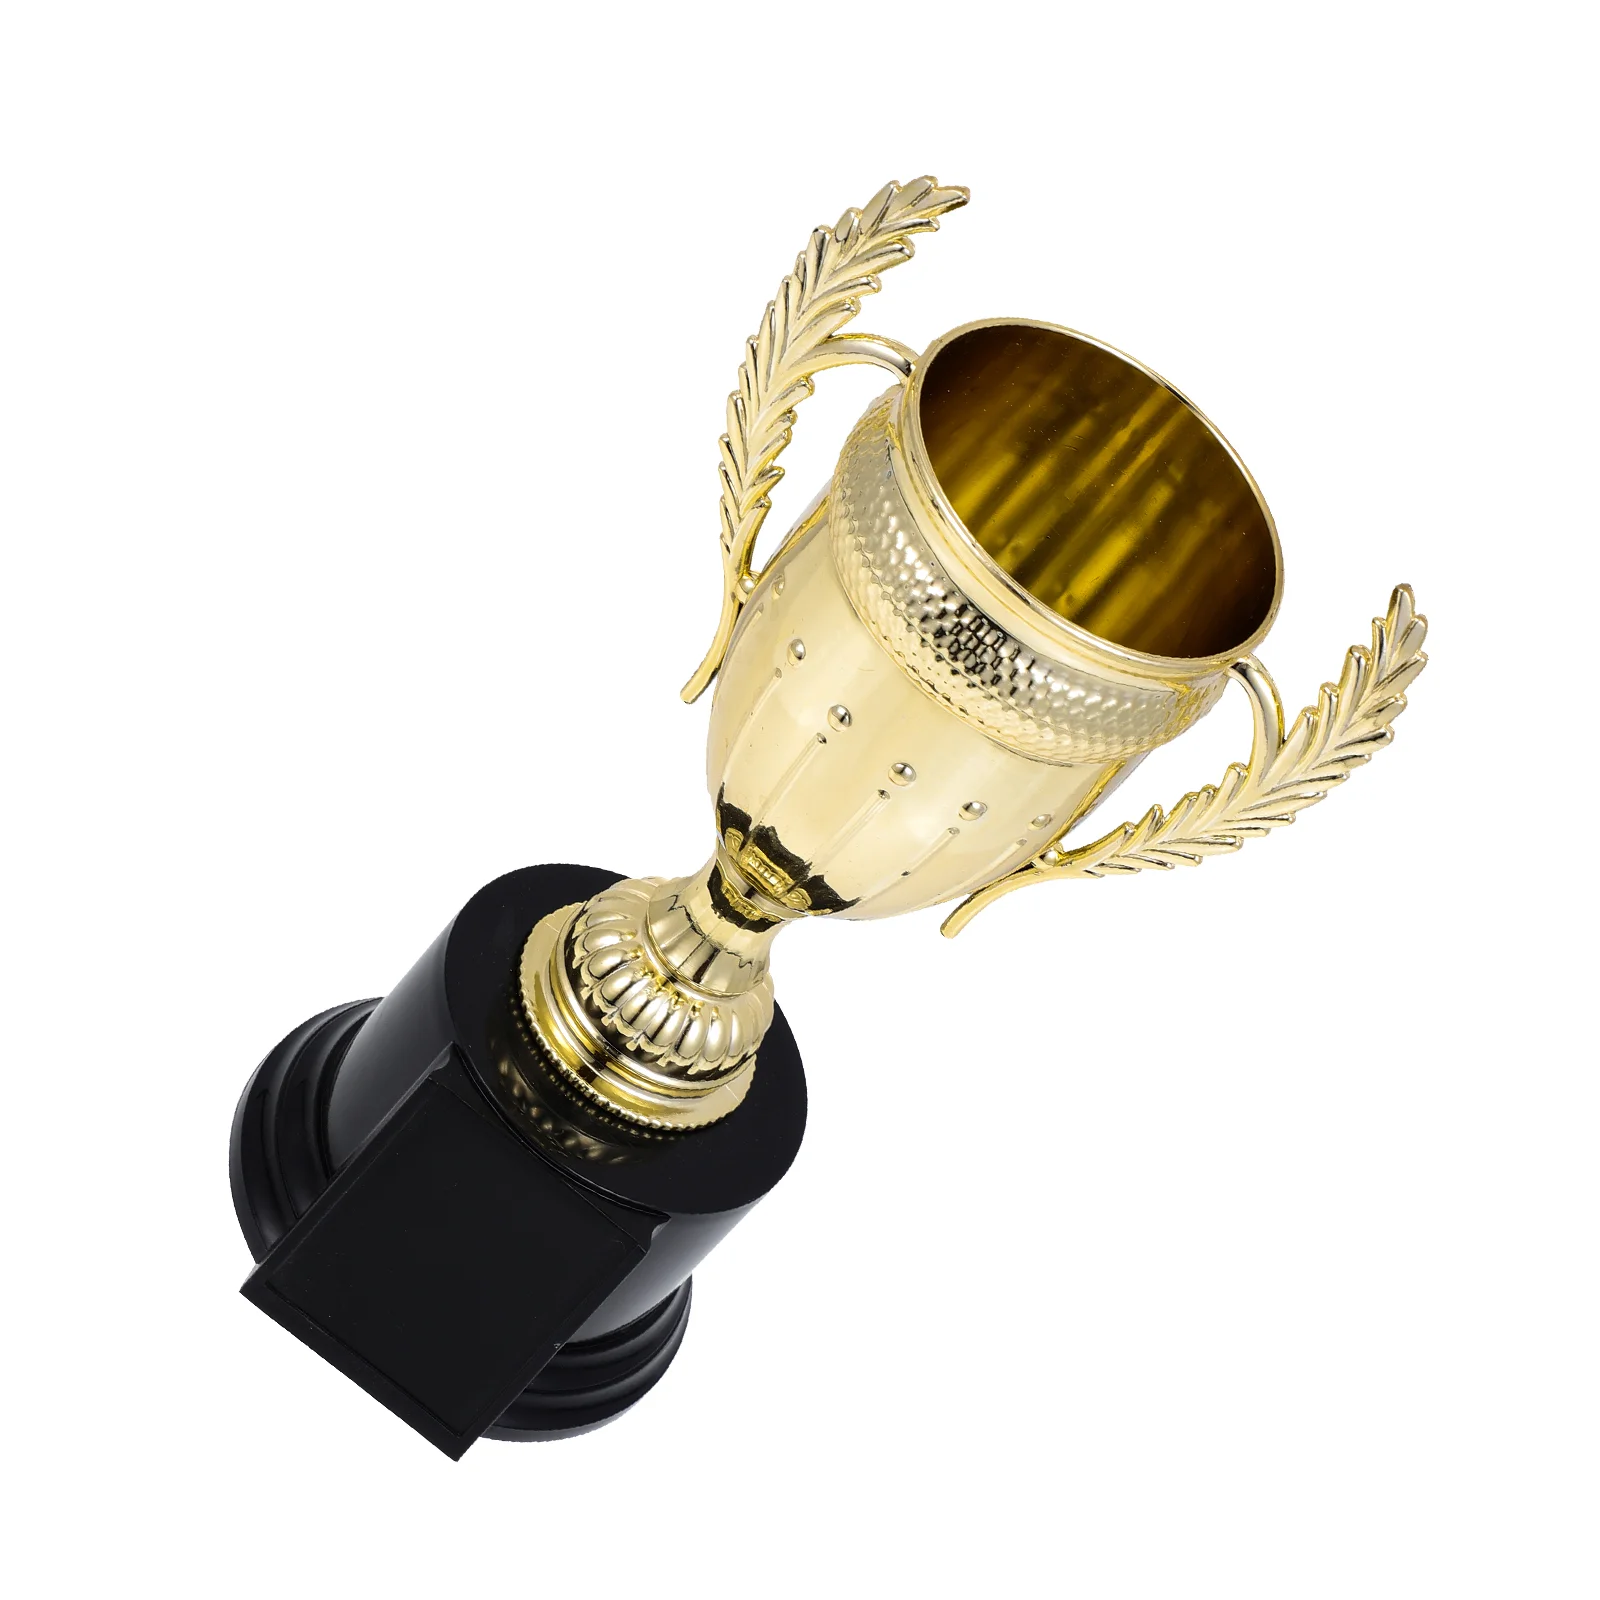 

Trophy Cup Trophies Award Trophys Kids Winnercompetition Goldenand Party Gold Awards Children Cups Game Soccer Football